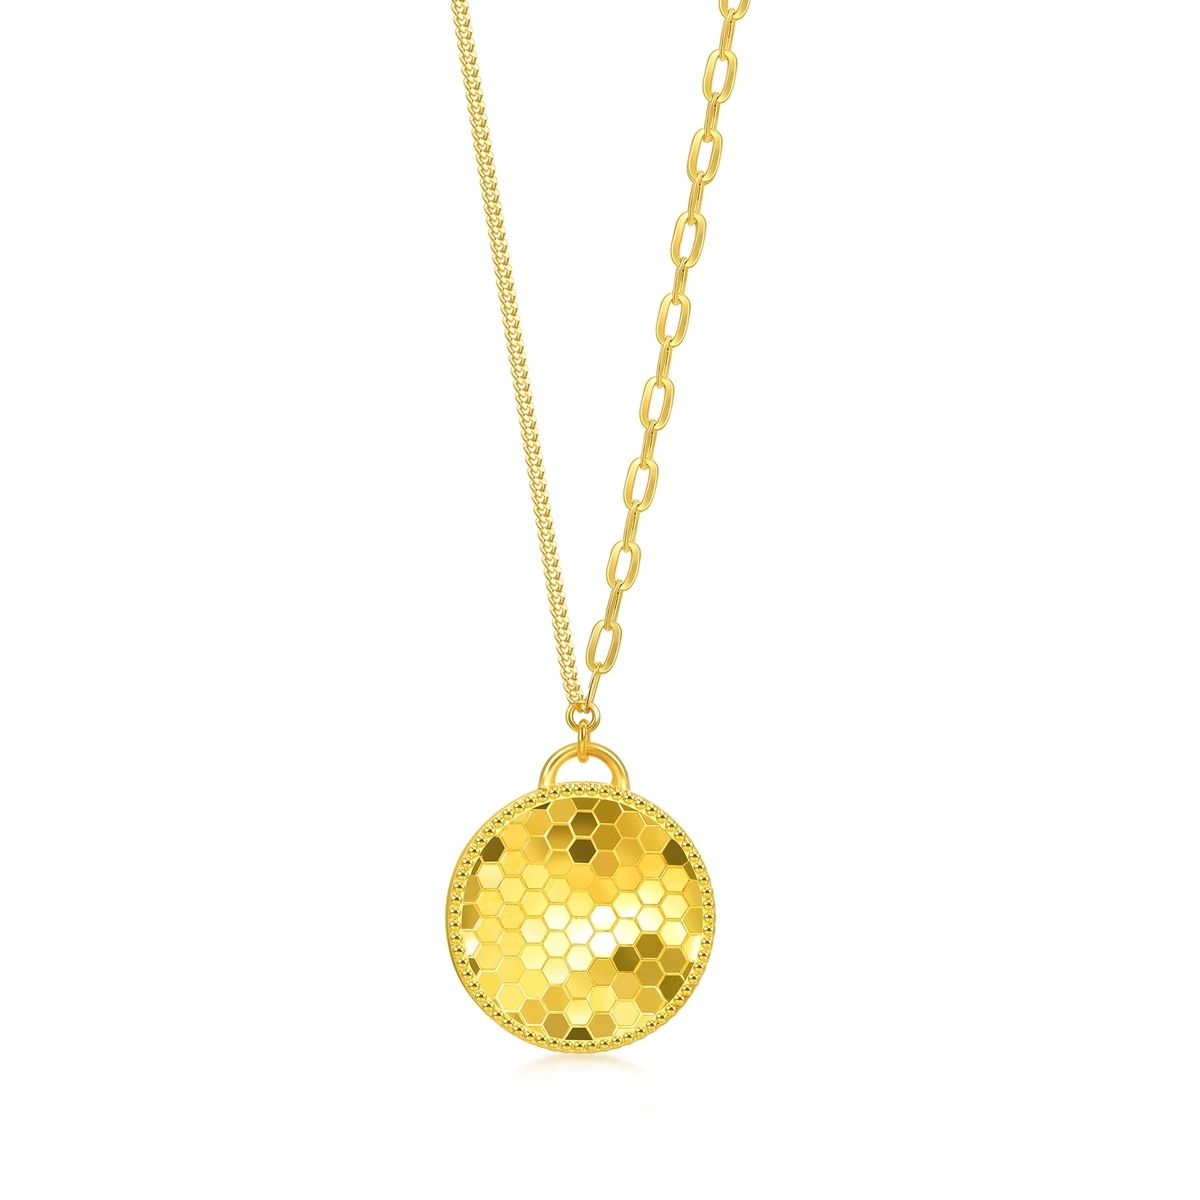 Mirror Gold 999 Gold Necklace - 93402N | Chow Sang Sang Jewellery